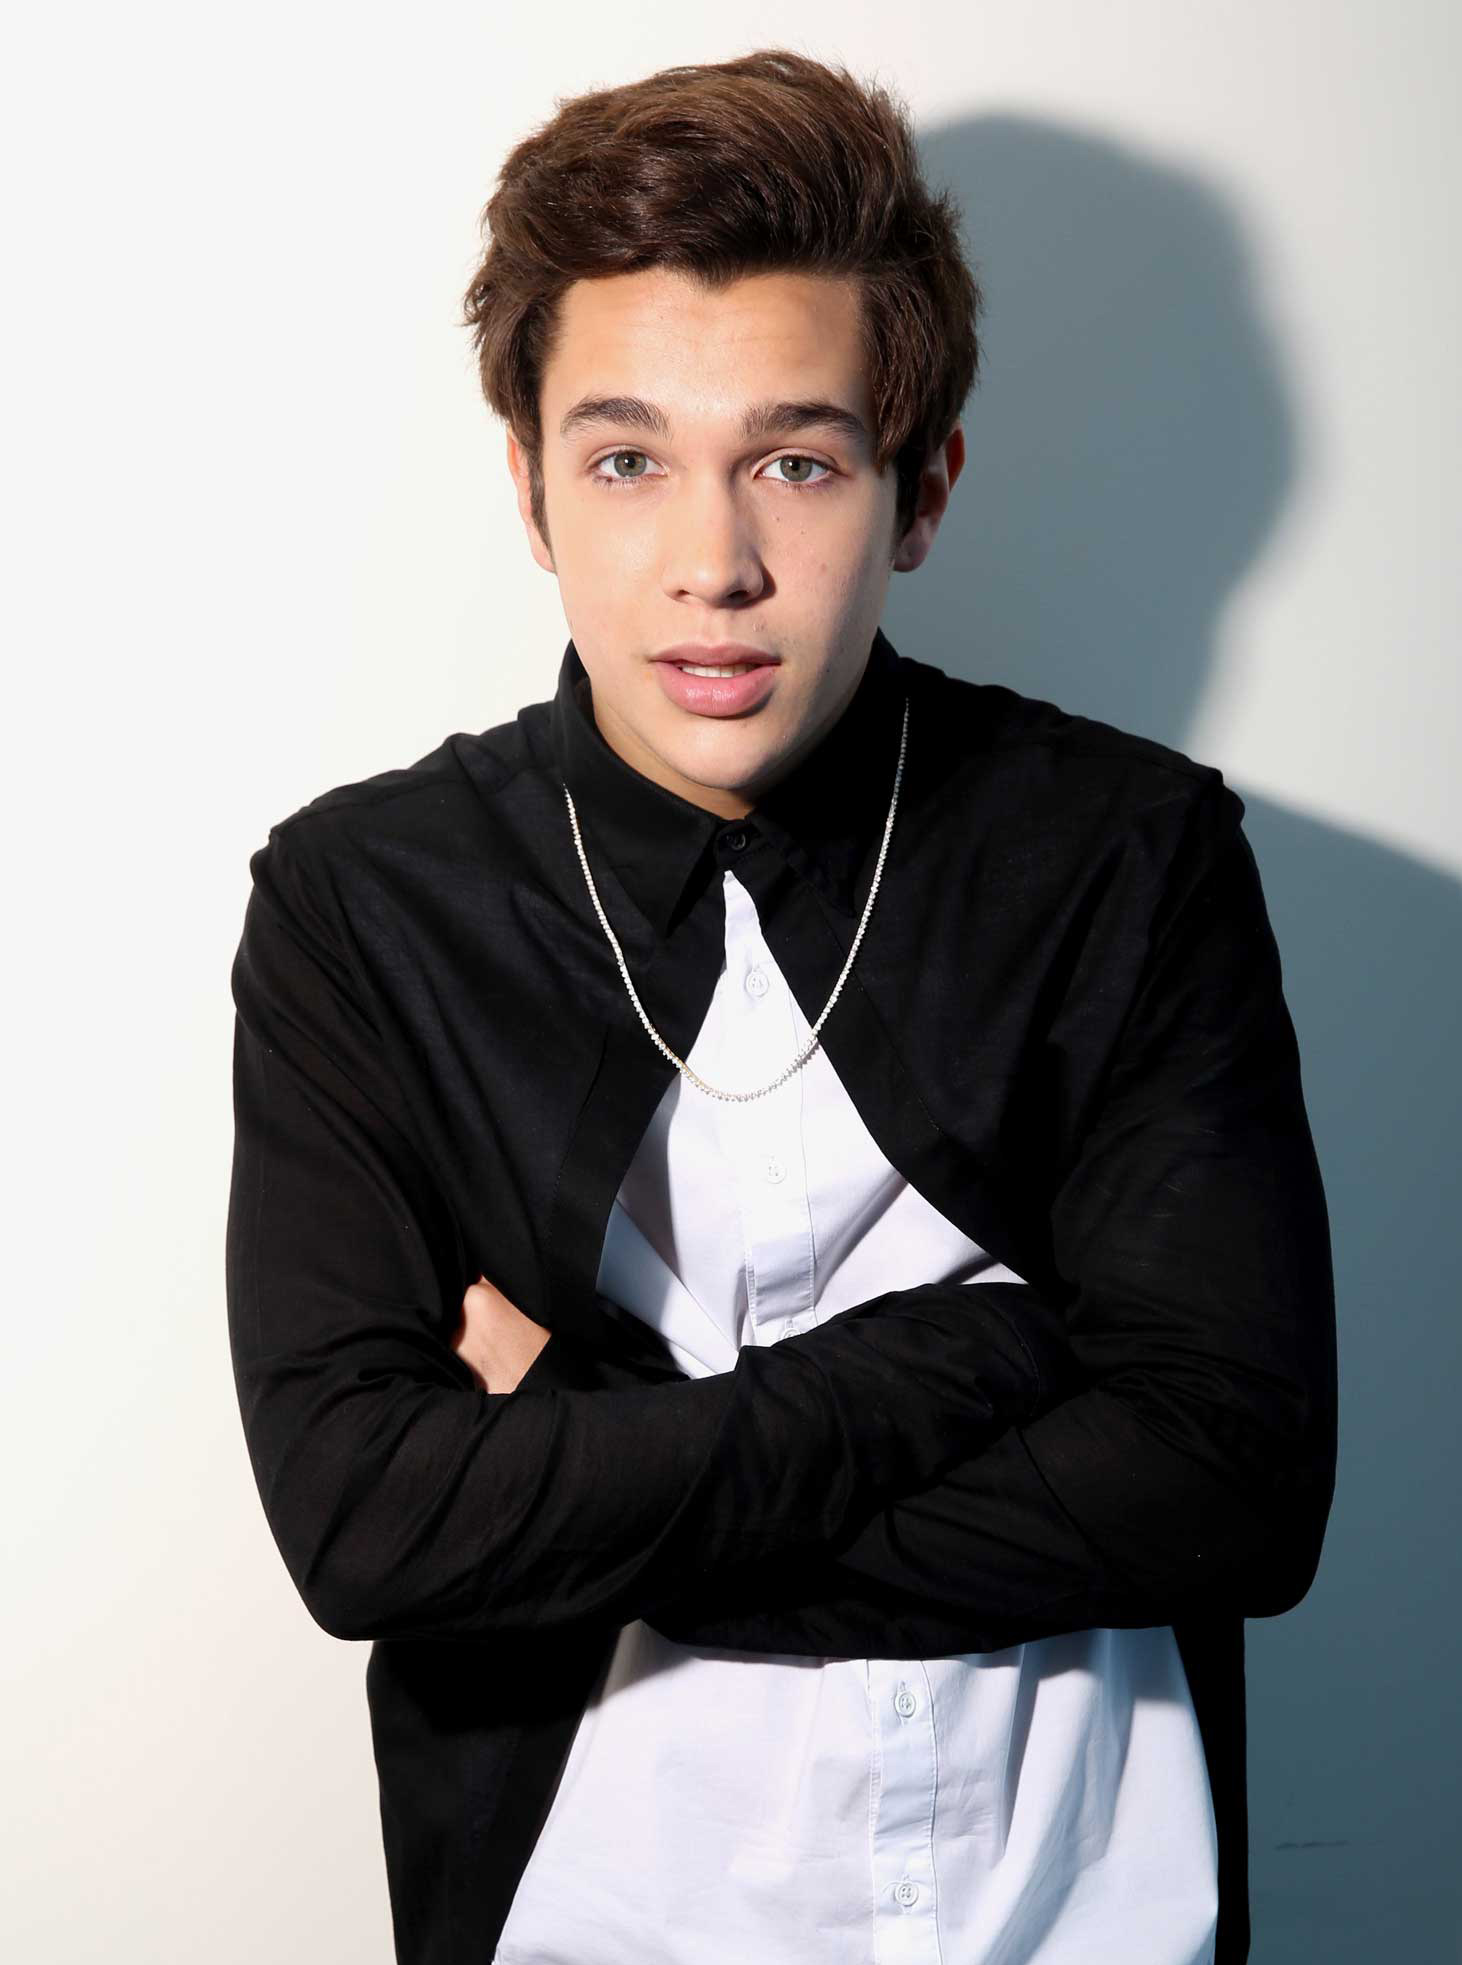 singer Austin Mahone poses for a portrait in Los Angeles. His EP  The Secret  released on May 23, 2014. (Photo by Matt Sayles/Invision/AP